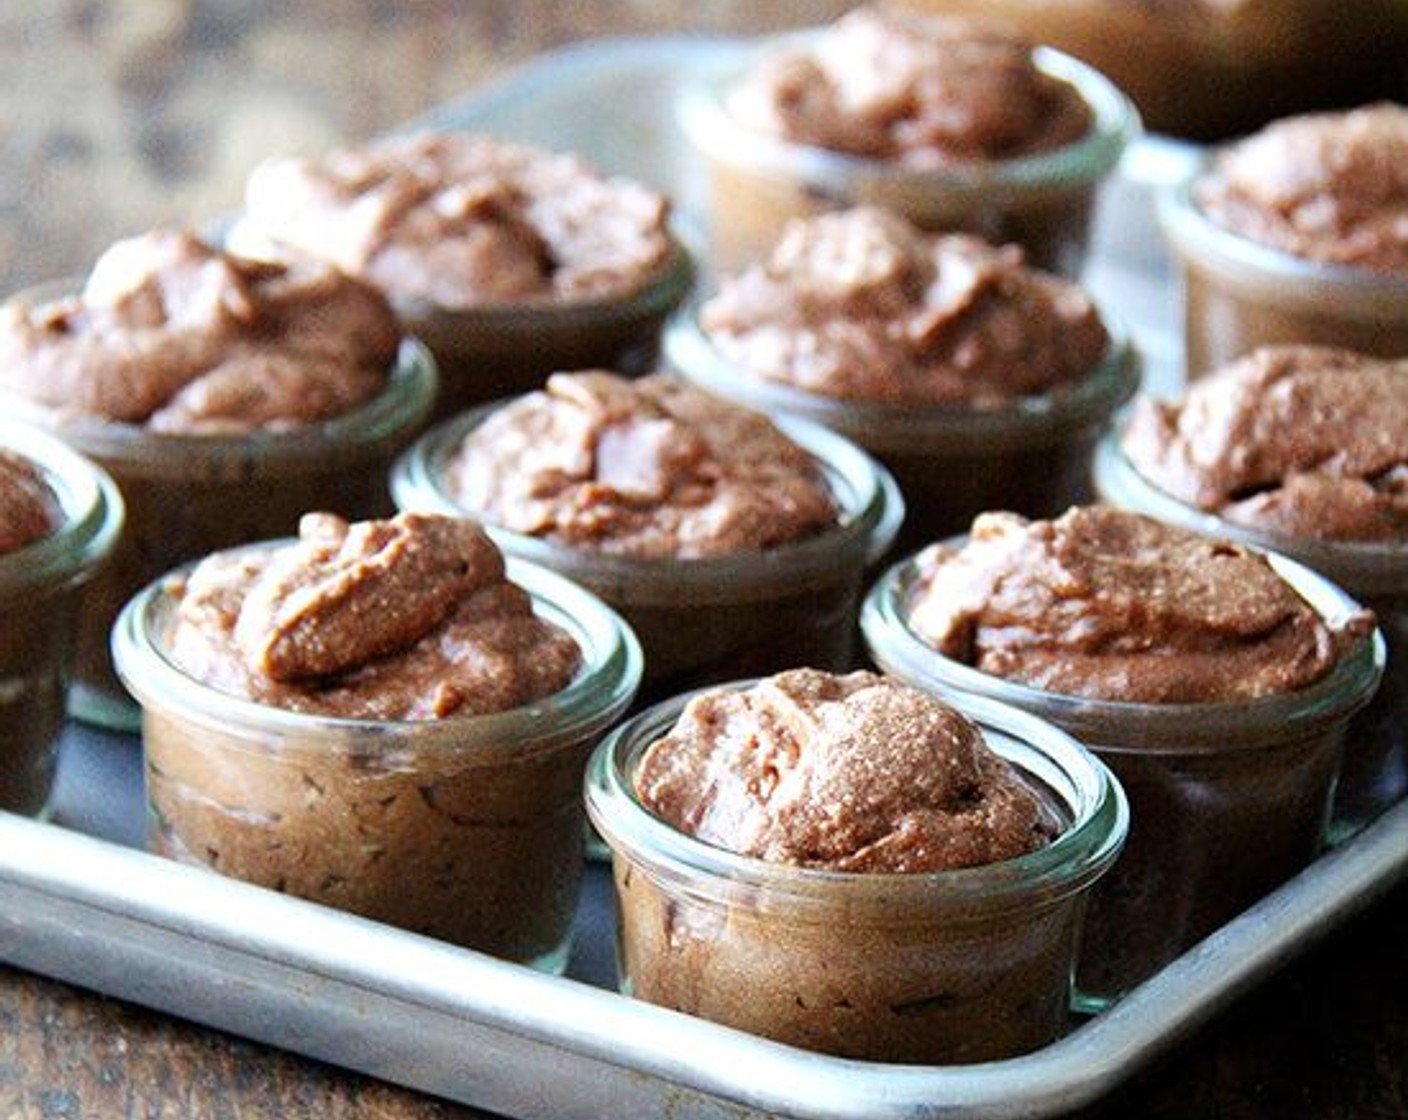 step 8 Transfer the mousse to a serving bowl or divide into serving dishes, and refrigerate for at least four hours, until firm.